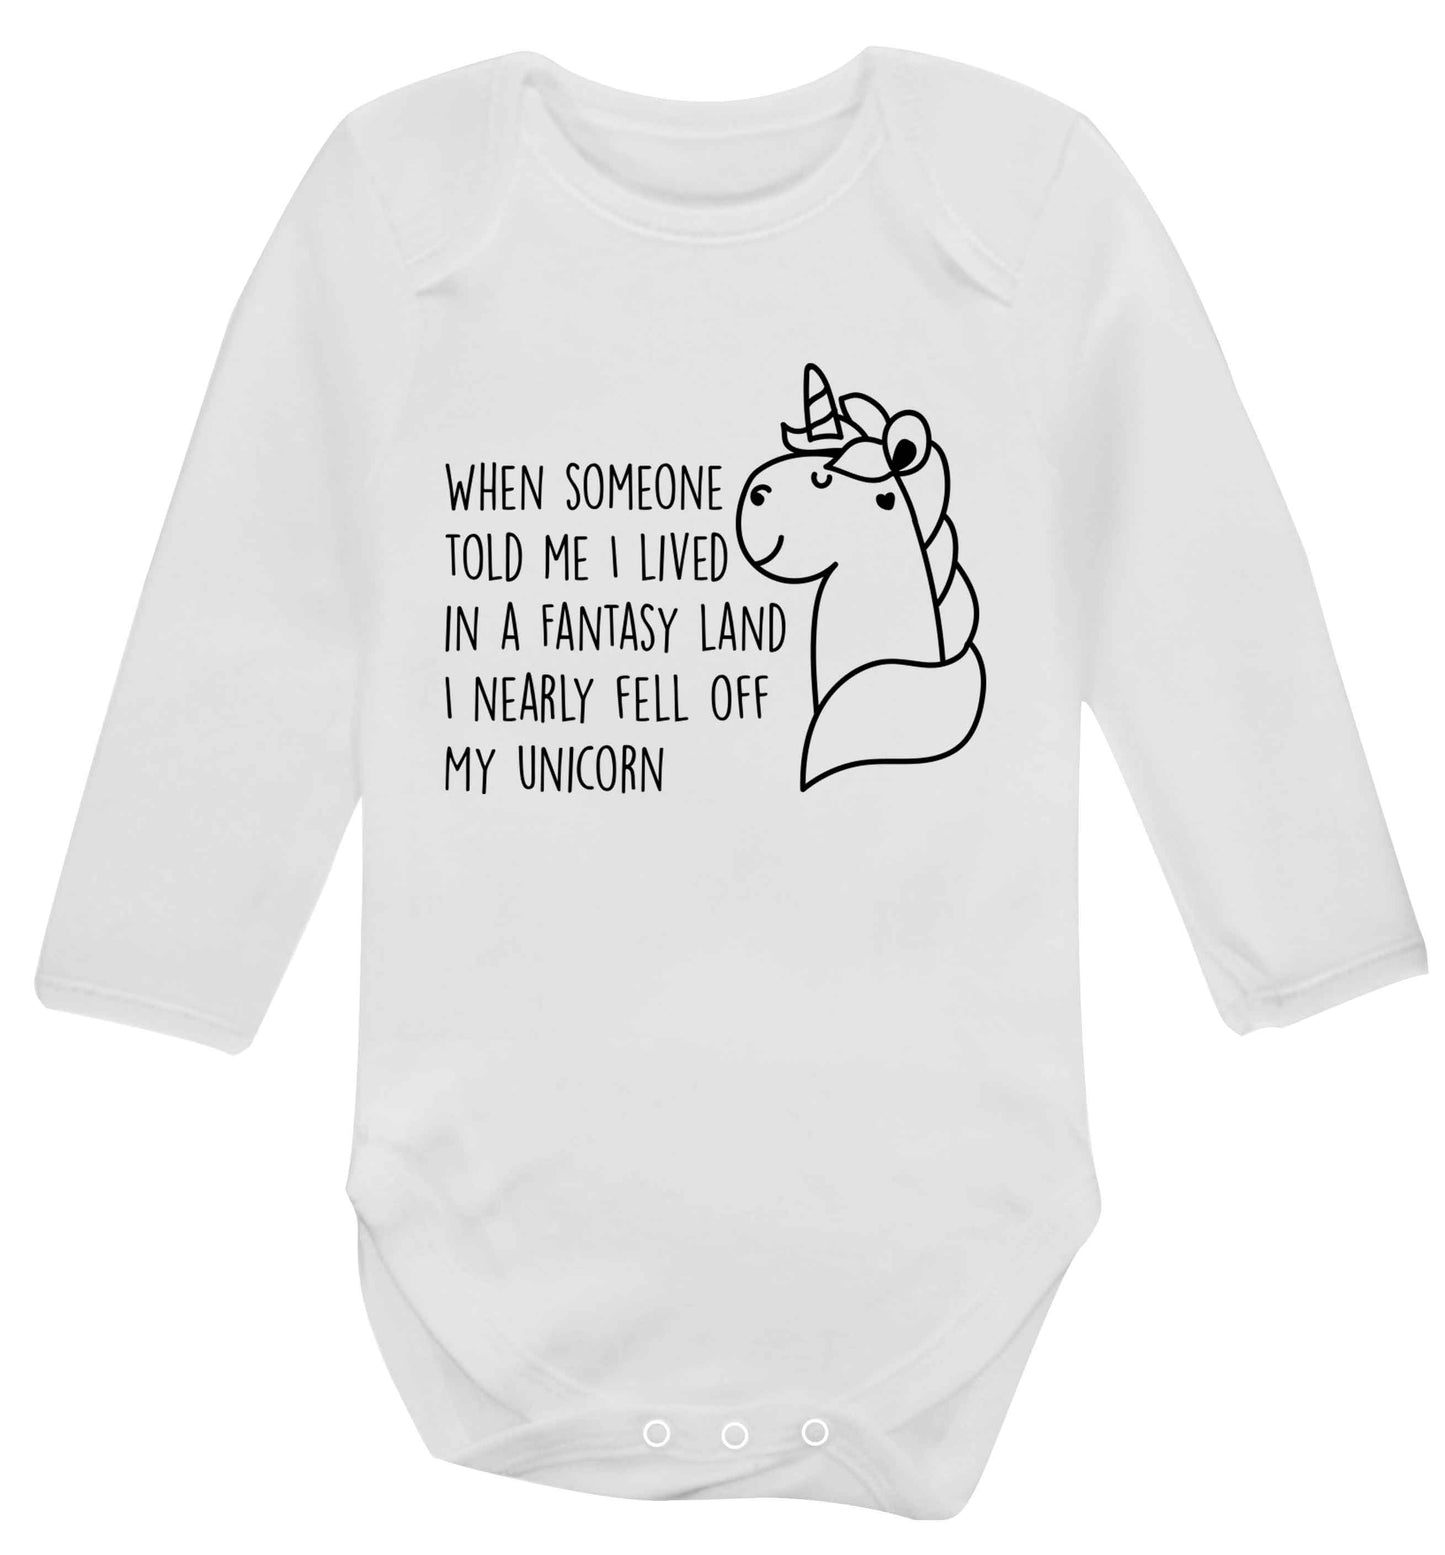 When somebody told me I lived in a fantasy land I nearly fell of my unicorn Baby Vest long sleeved white 6-12 months